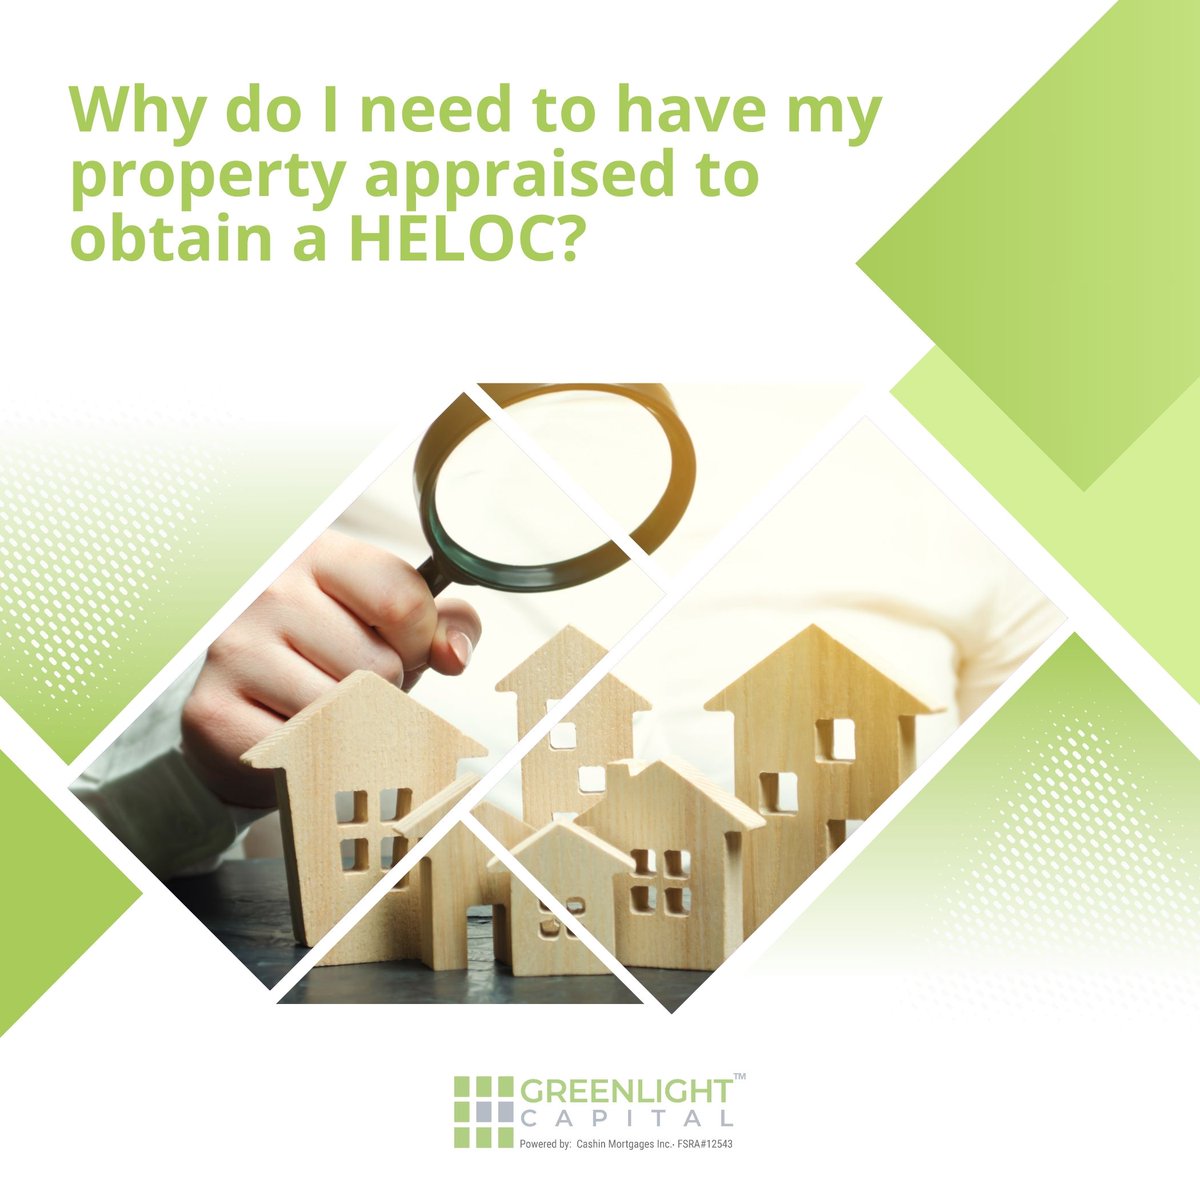 Property appraised! 🏡 Discovering the true value of your property helps us tailor your HELOC credit limit. Plus, it gives insights into your property's current condition. 🔍💼

#PropertyAppraisal #HELOC #FinancialPlannin  #TorontoHELOC #GreenlightCapitalCanada #GreenlightCapital